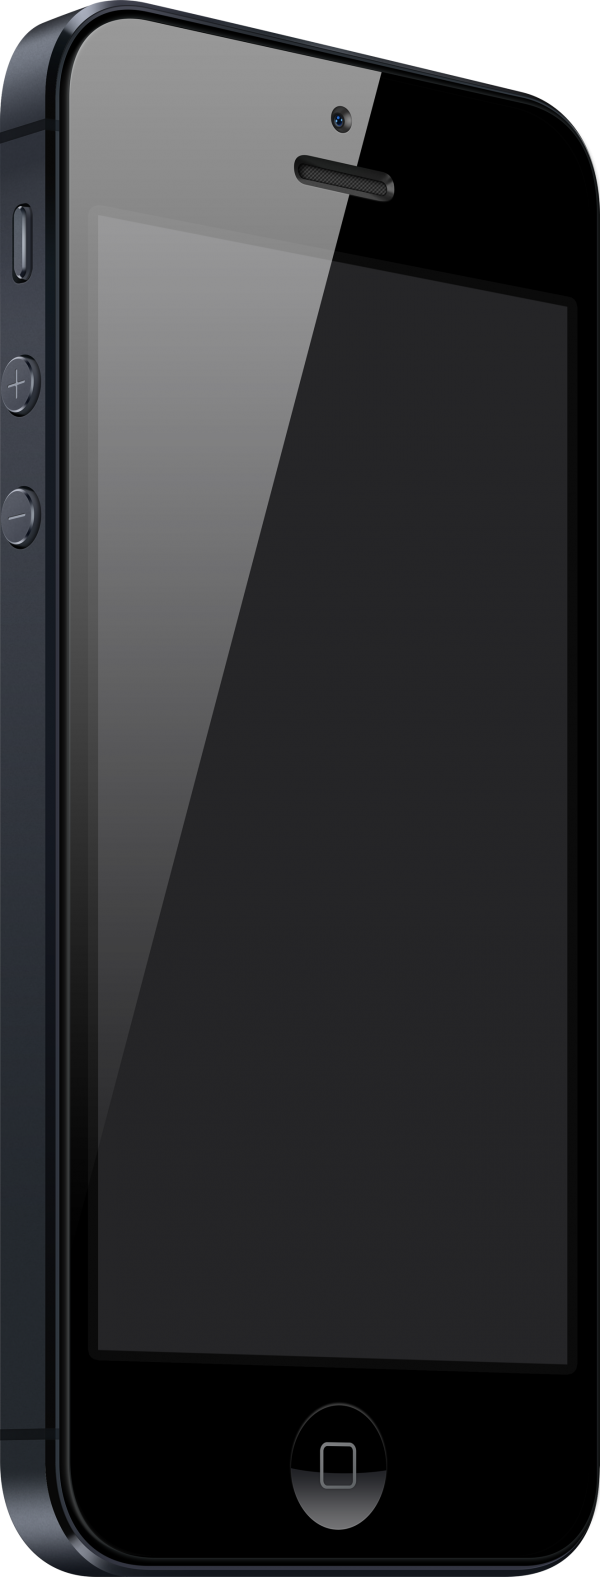 Iphone PNG Free Download 1